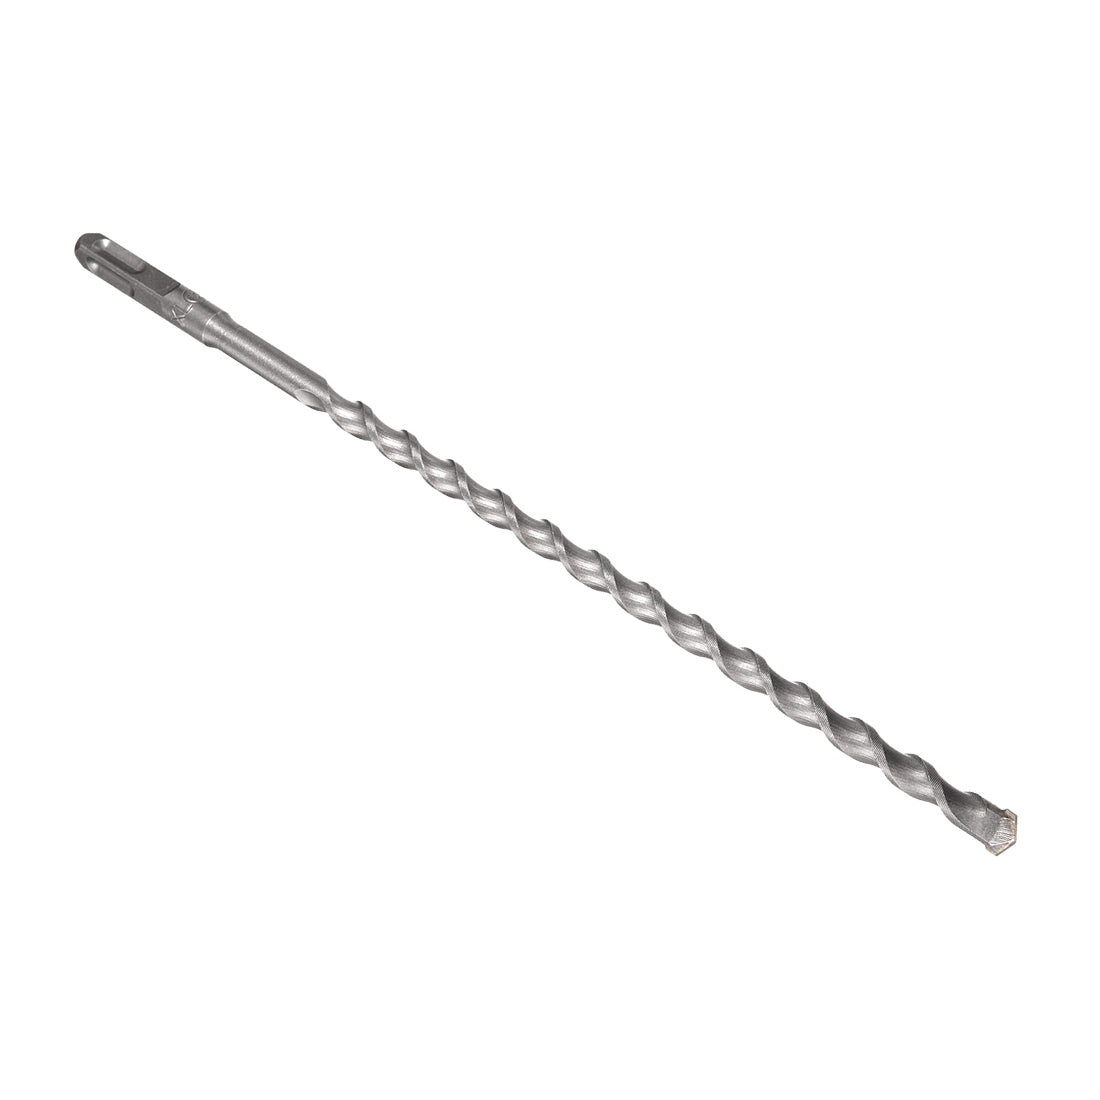 uxcell Uxcell 12mm Carbide-Tipped Rotary Hammer Hollow Square Shank Drill Bit 340mm Long